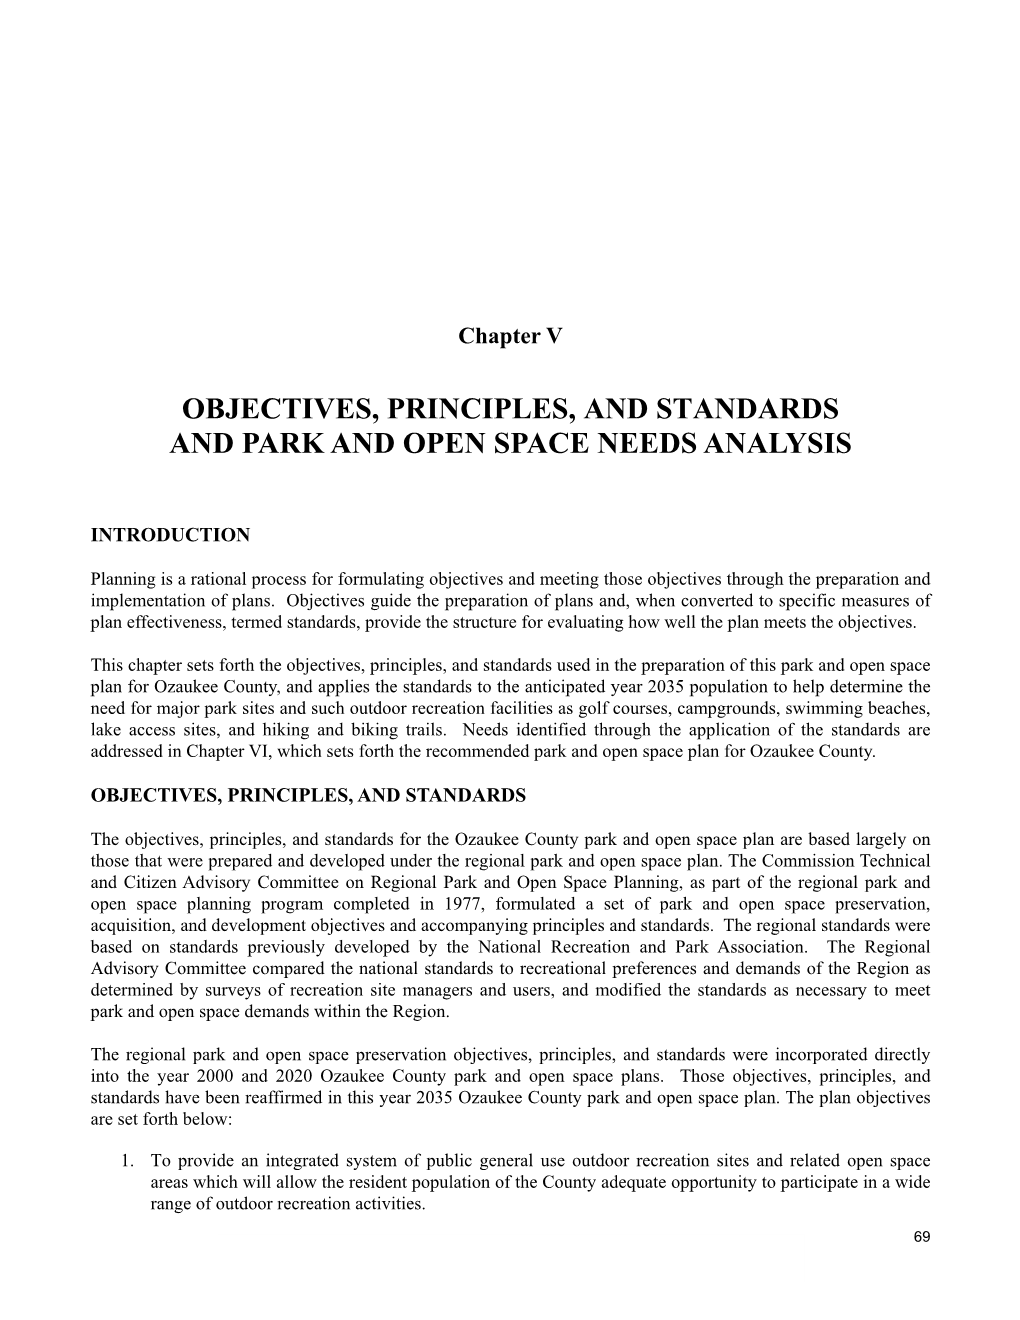 Objectives, Principles, and Standards and Park and Open Space Needs Analysis